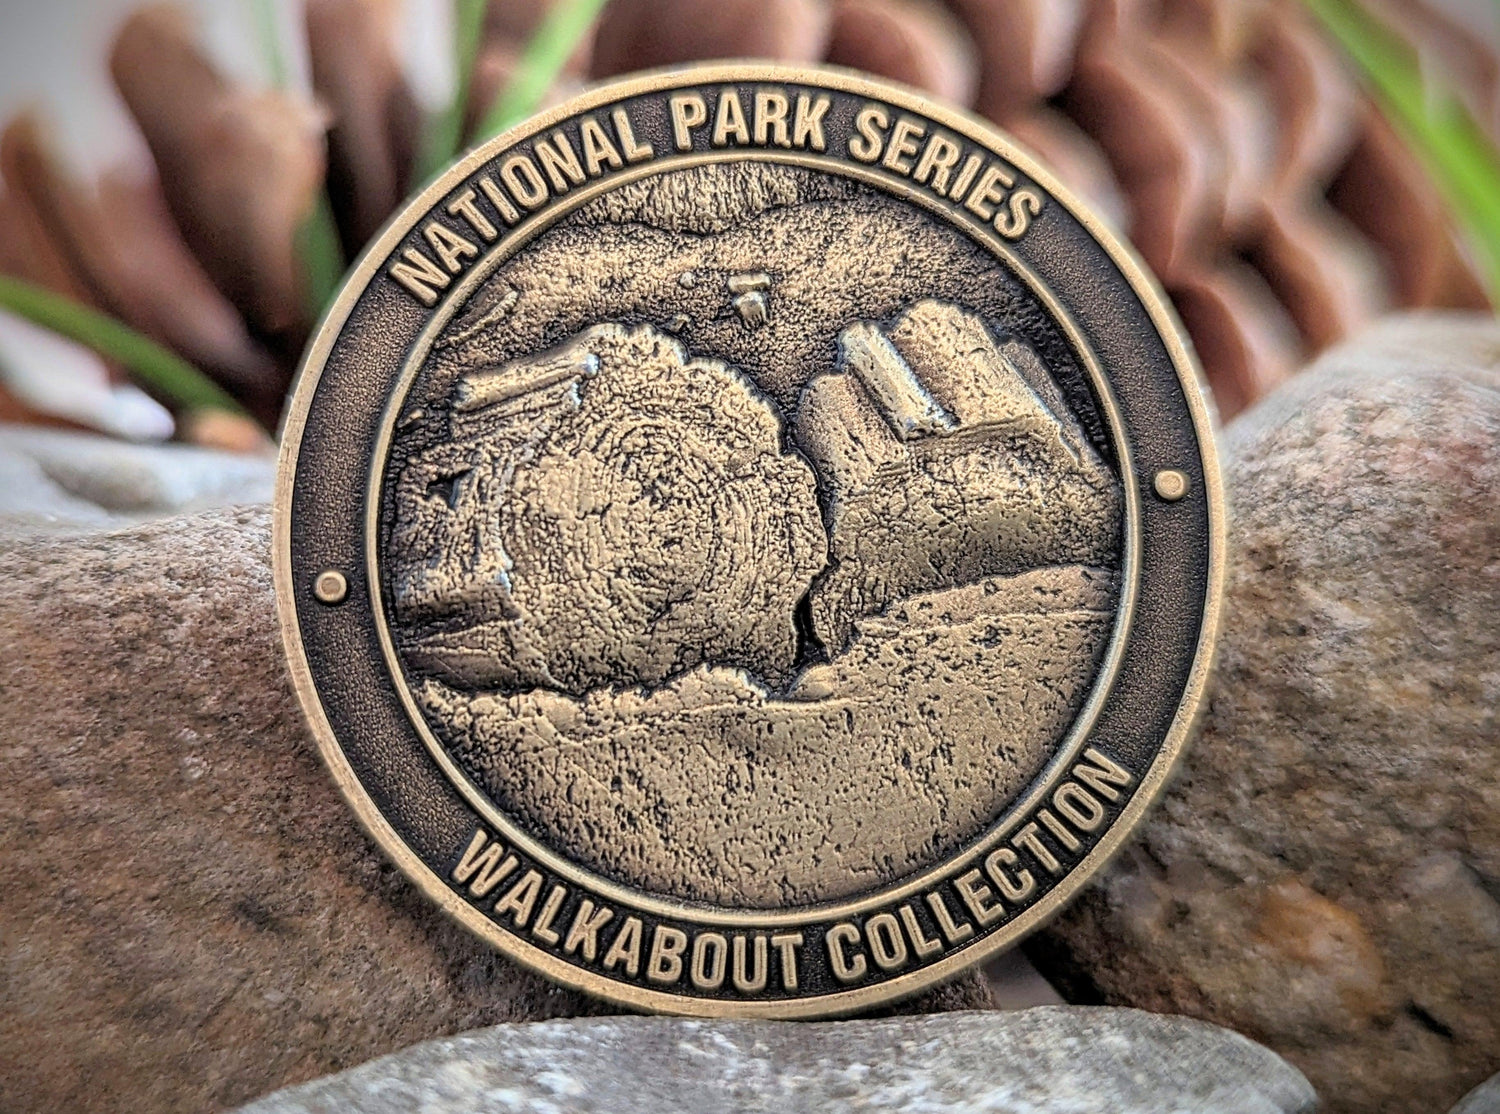 PETRIFIED FOREST NATIONAL PARK CHALLENGE COIN